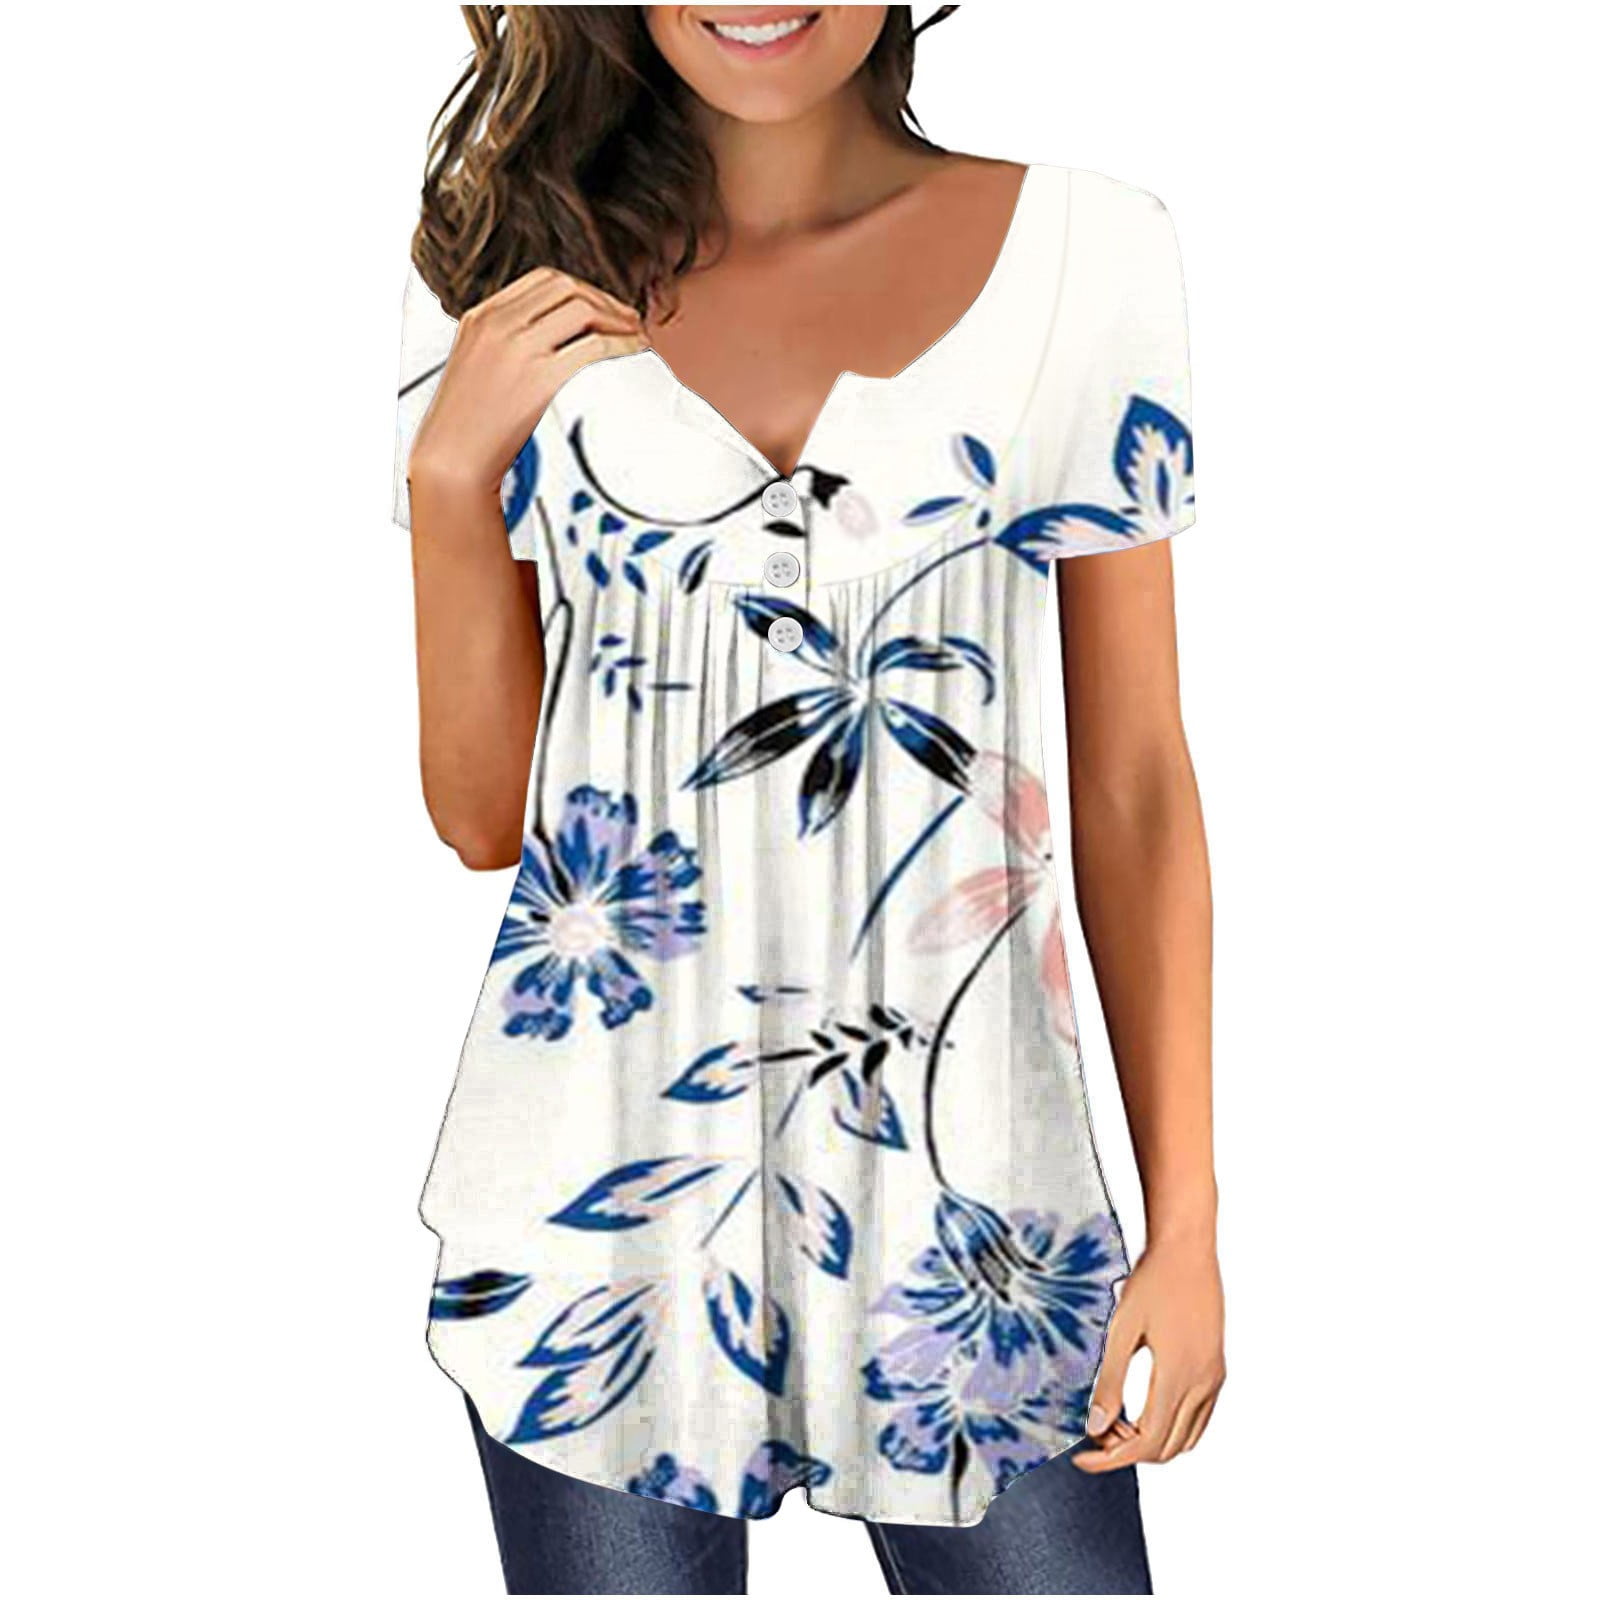 KIJBLAE Boho Shirts for Women Tummy Control Clothes for Girls Button V-Neck  T-shirt Floral Print Tops Short Sleeve Tees Pleat Flowy Tunic Blouses